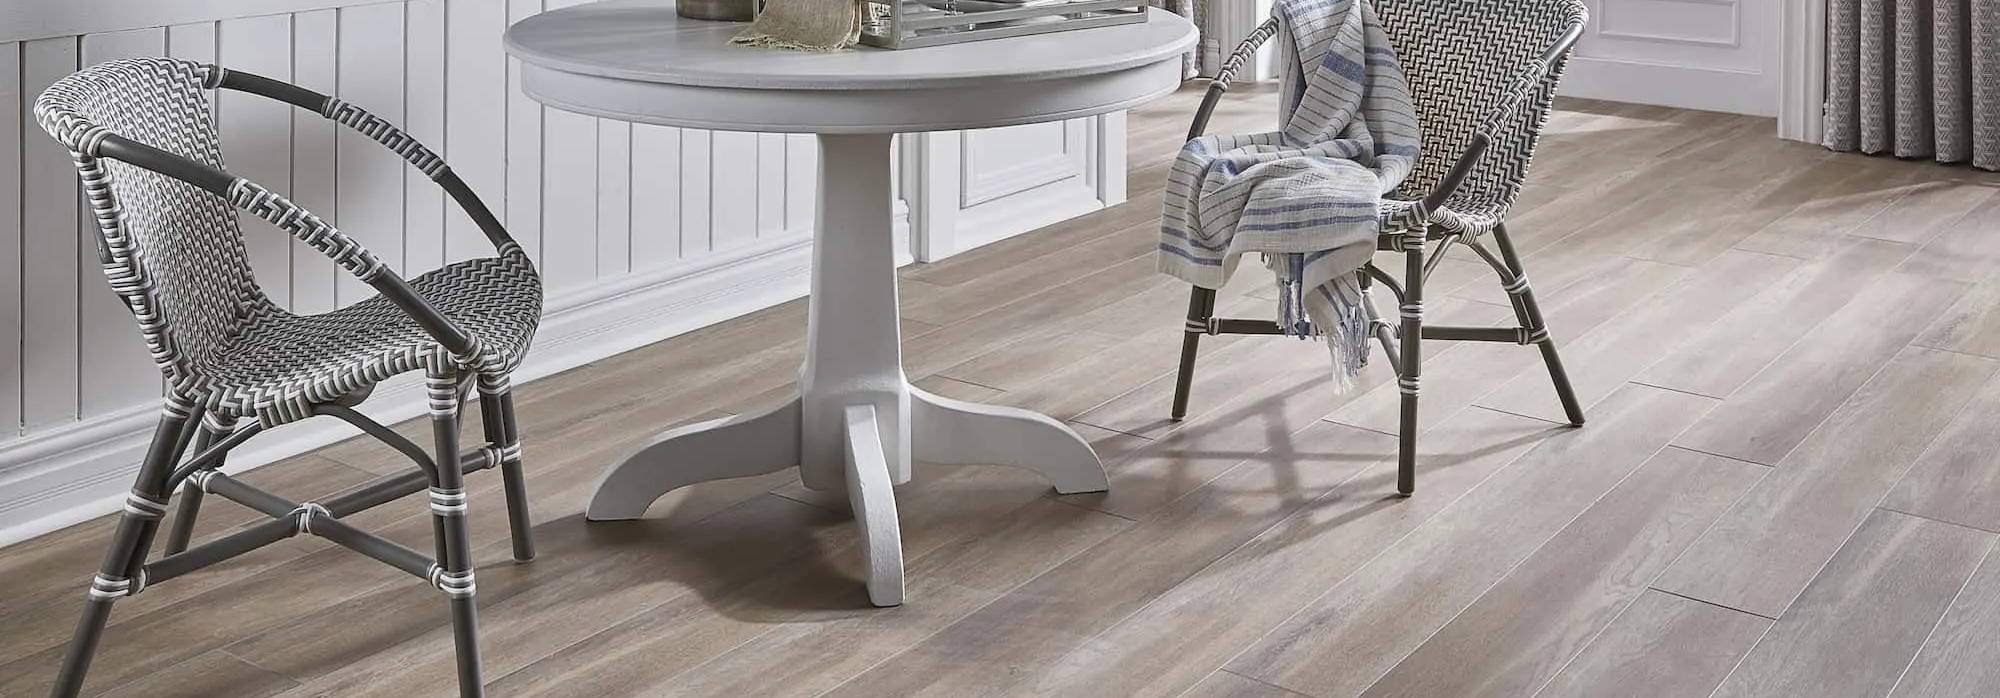 Image of Light Hardwood Flooring Offered at Kaoud Rugs and Carpet in West Hartford and Manchester, CT